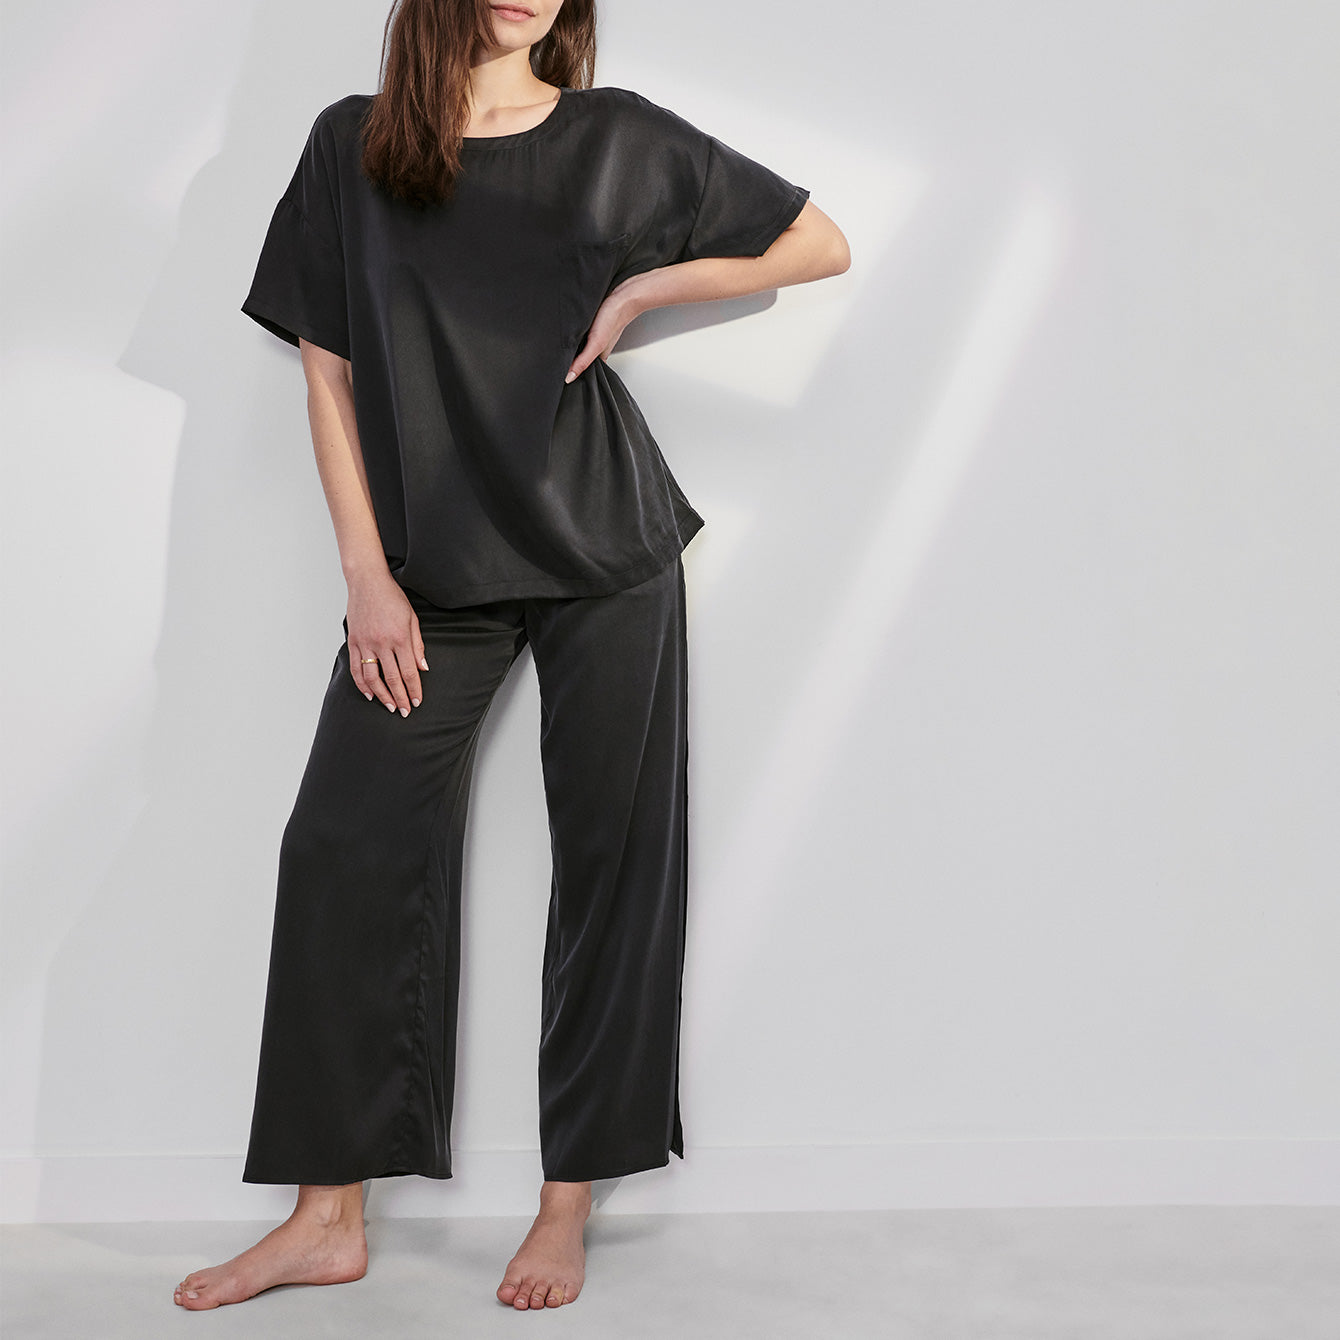 Is Lunya Washable Silk Really Worth The Astonishing Hype? - the primpy sheep